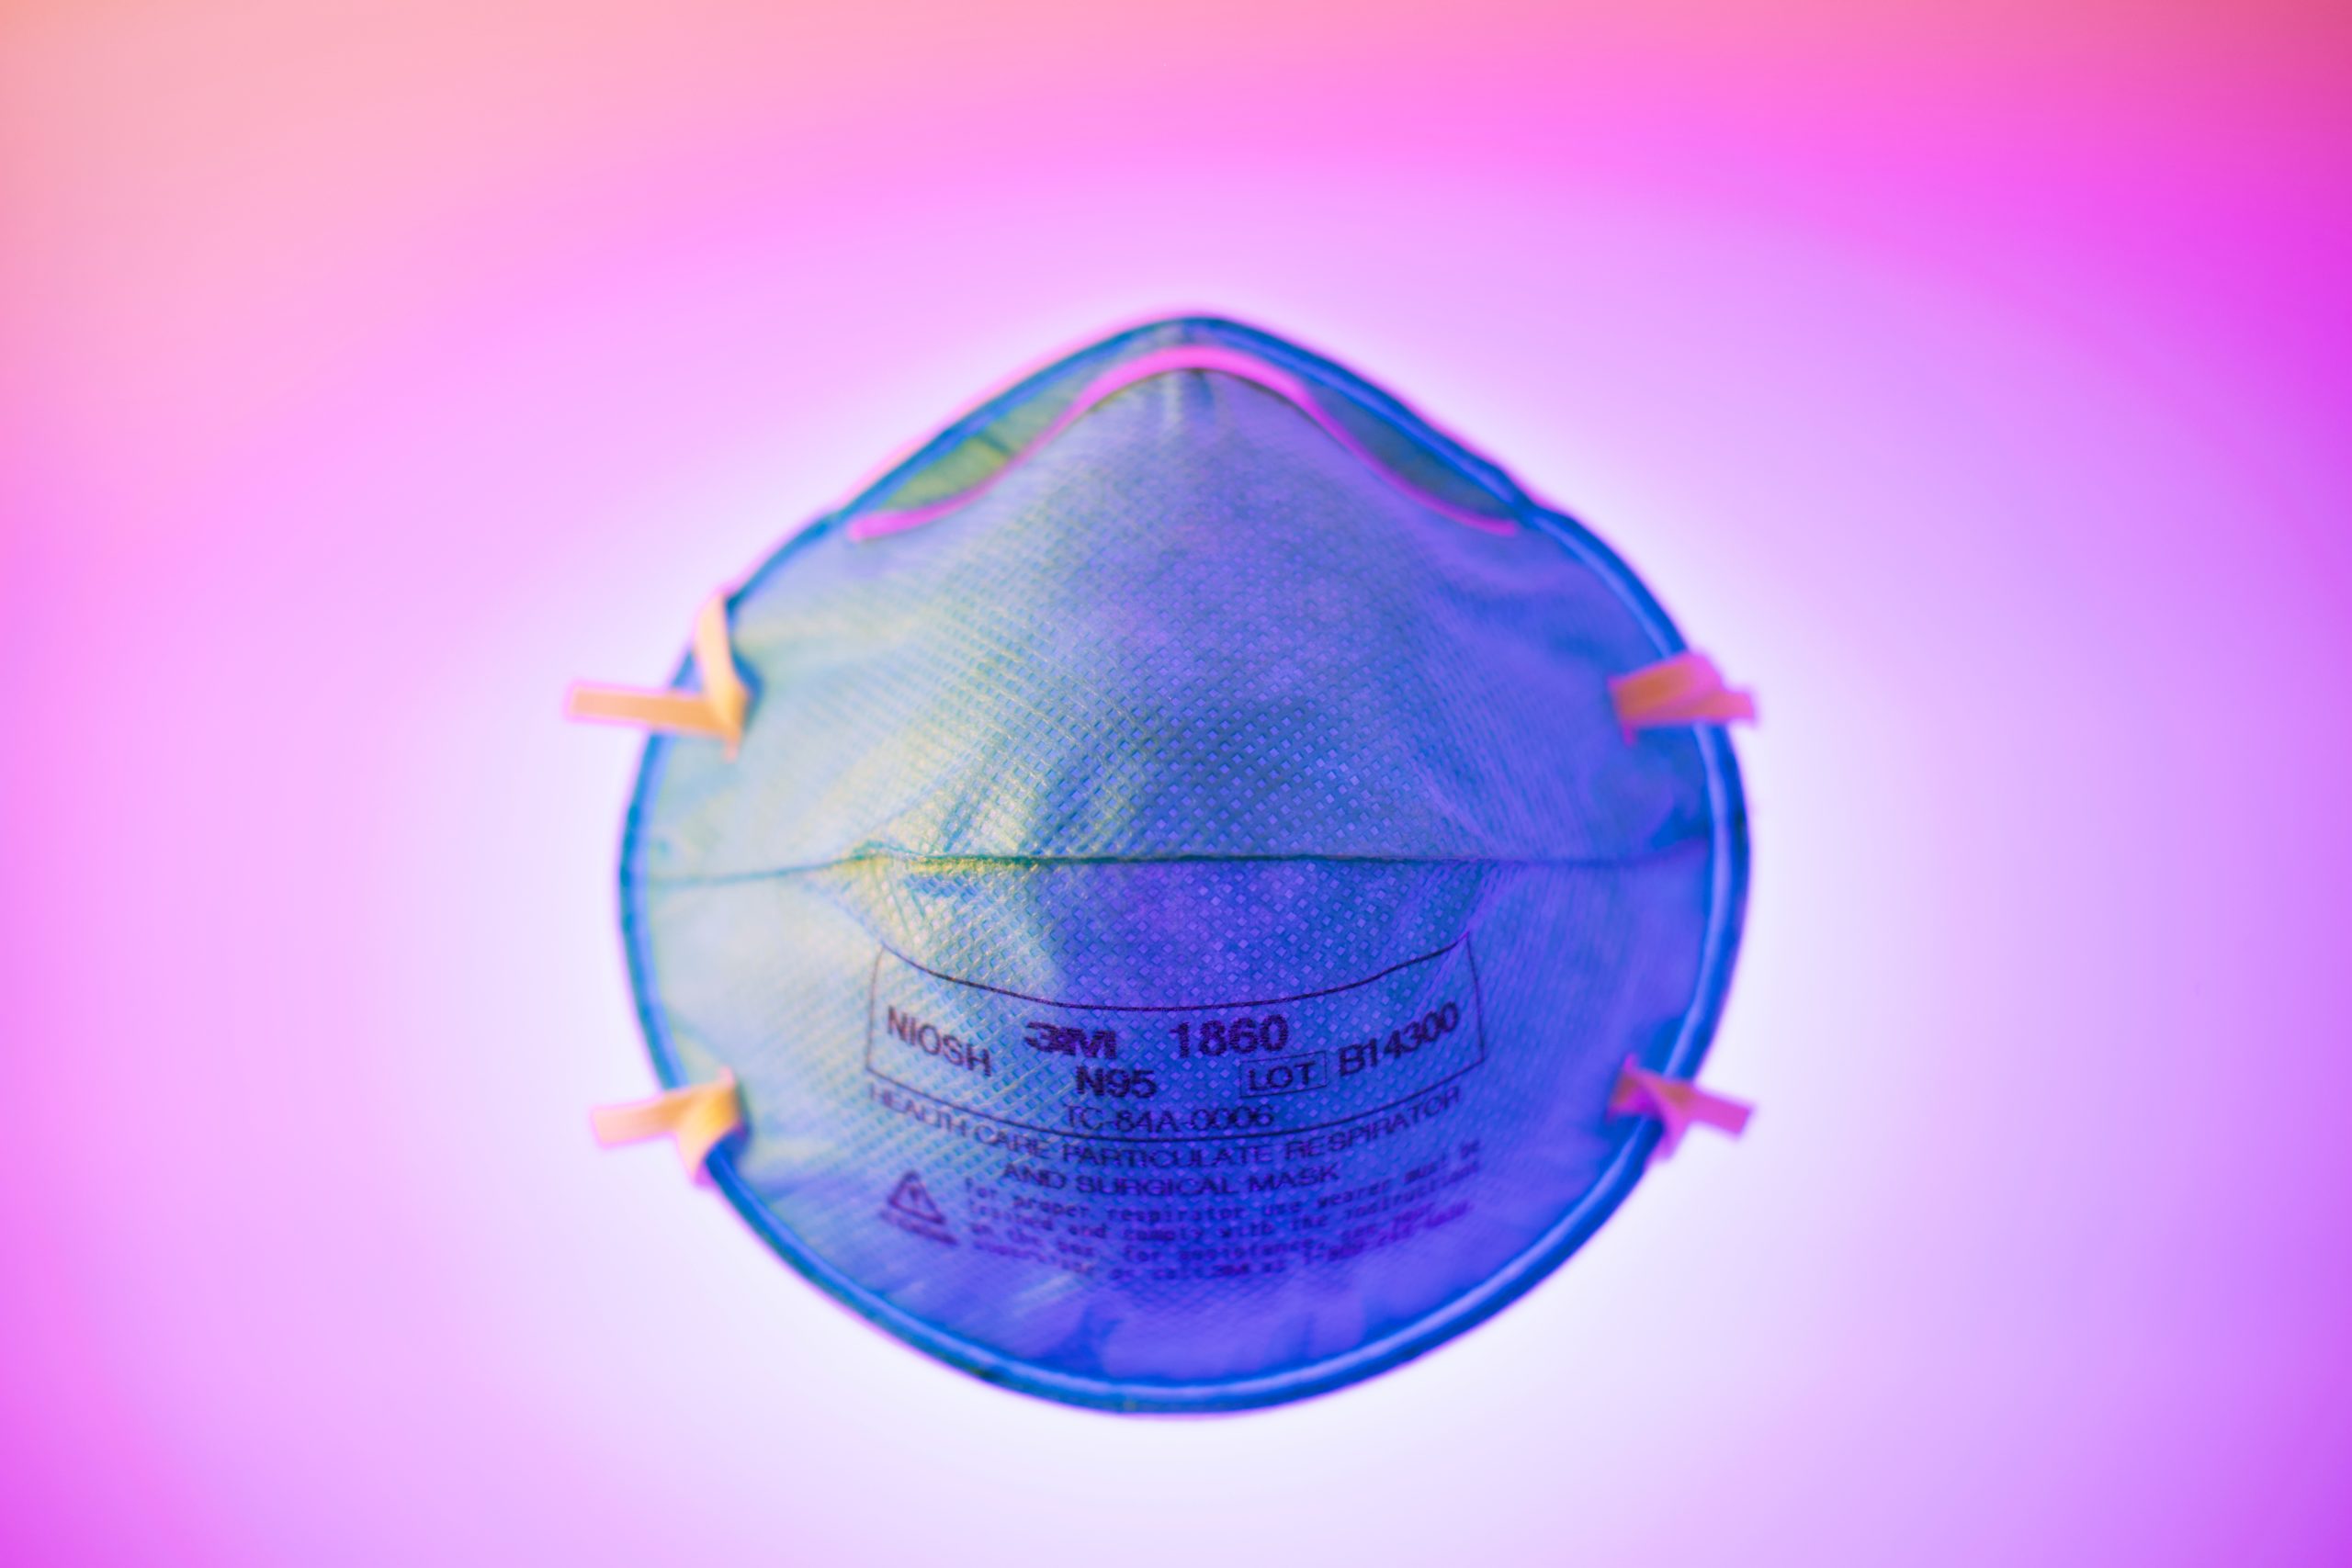 Here's how COVID-19 is affecting the LGBTQ community. Face mask light with blue light amid pink-lit background. Photo by Brian McGowan on Unsplash